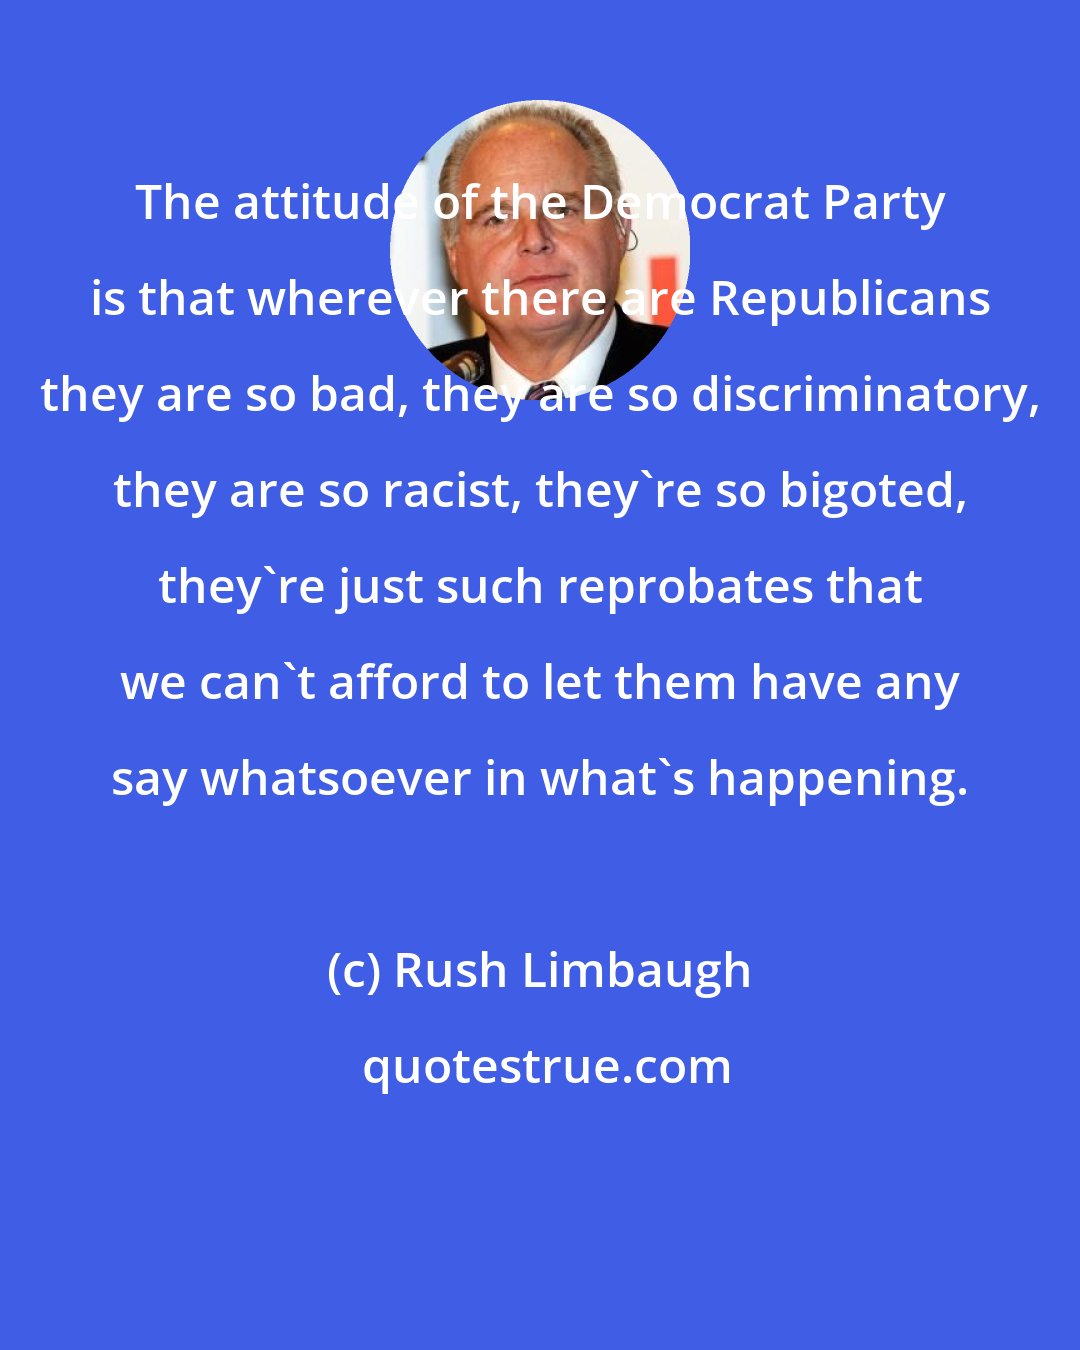 Rush Limbaugh: The attitude of the Democrat Party is that wherever there are Republicans they are so bad, they are so discriminatory, they are so racist, they're so bigoted, they're just such reprobates that we can't afford to let them have any say whatsoever in what's happening.